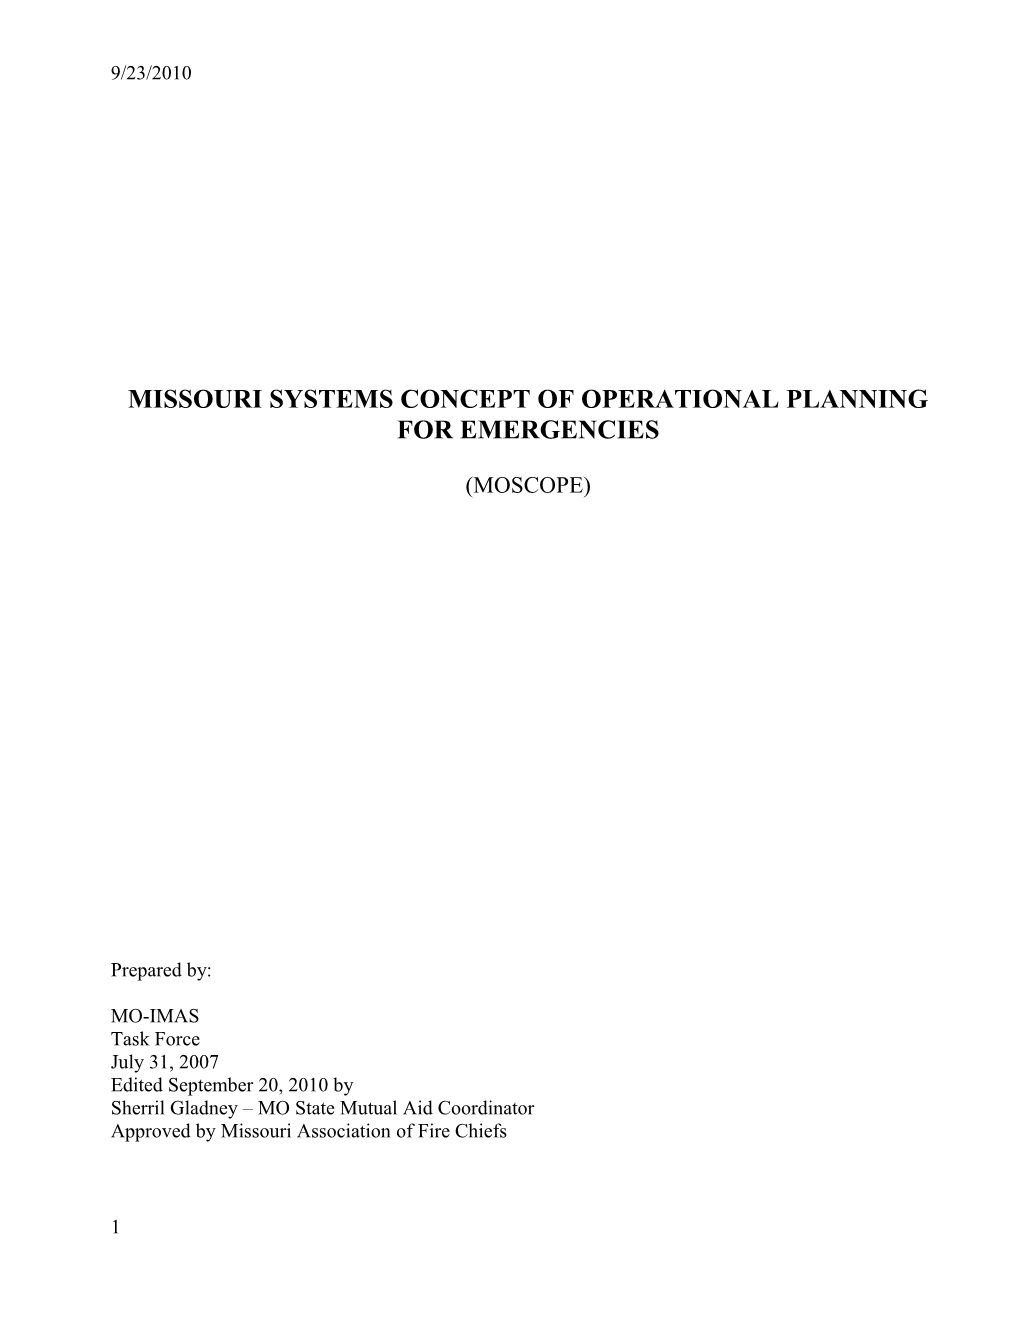 Missouri Systems Concept of Operational Planning for Emergencies